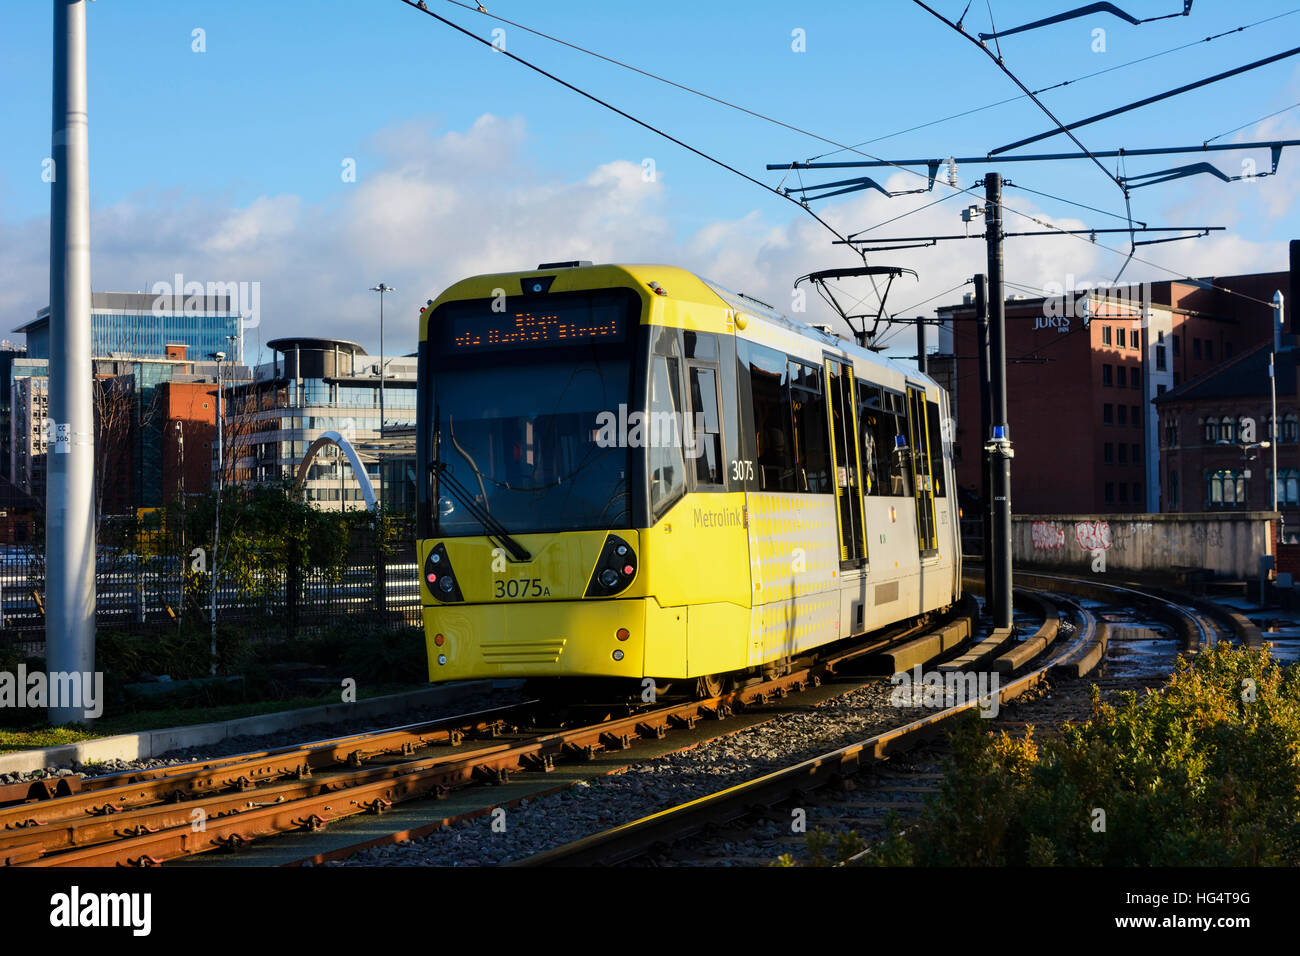 The Light Railway System at Deansgate Station in Manchester England,. Stock Photo